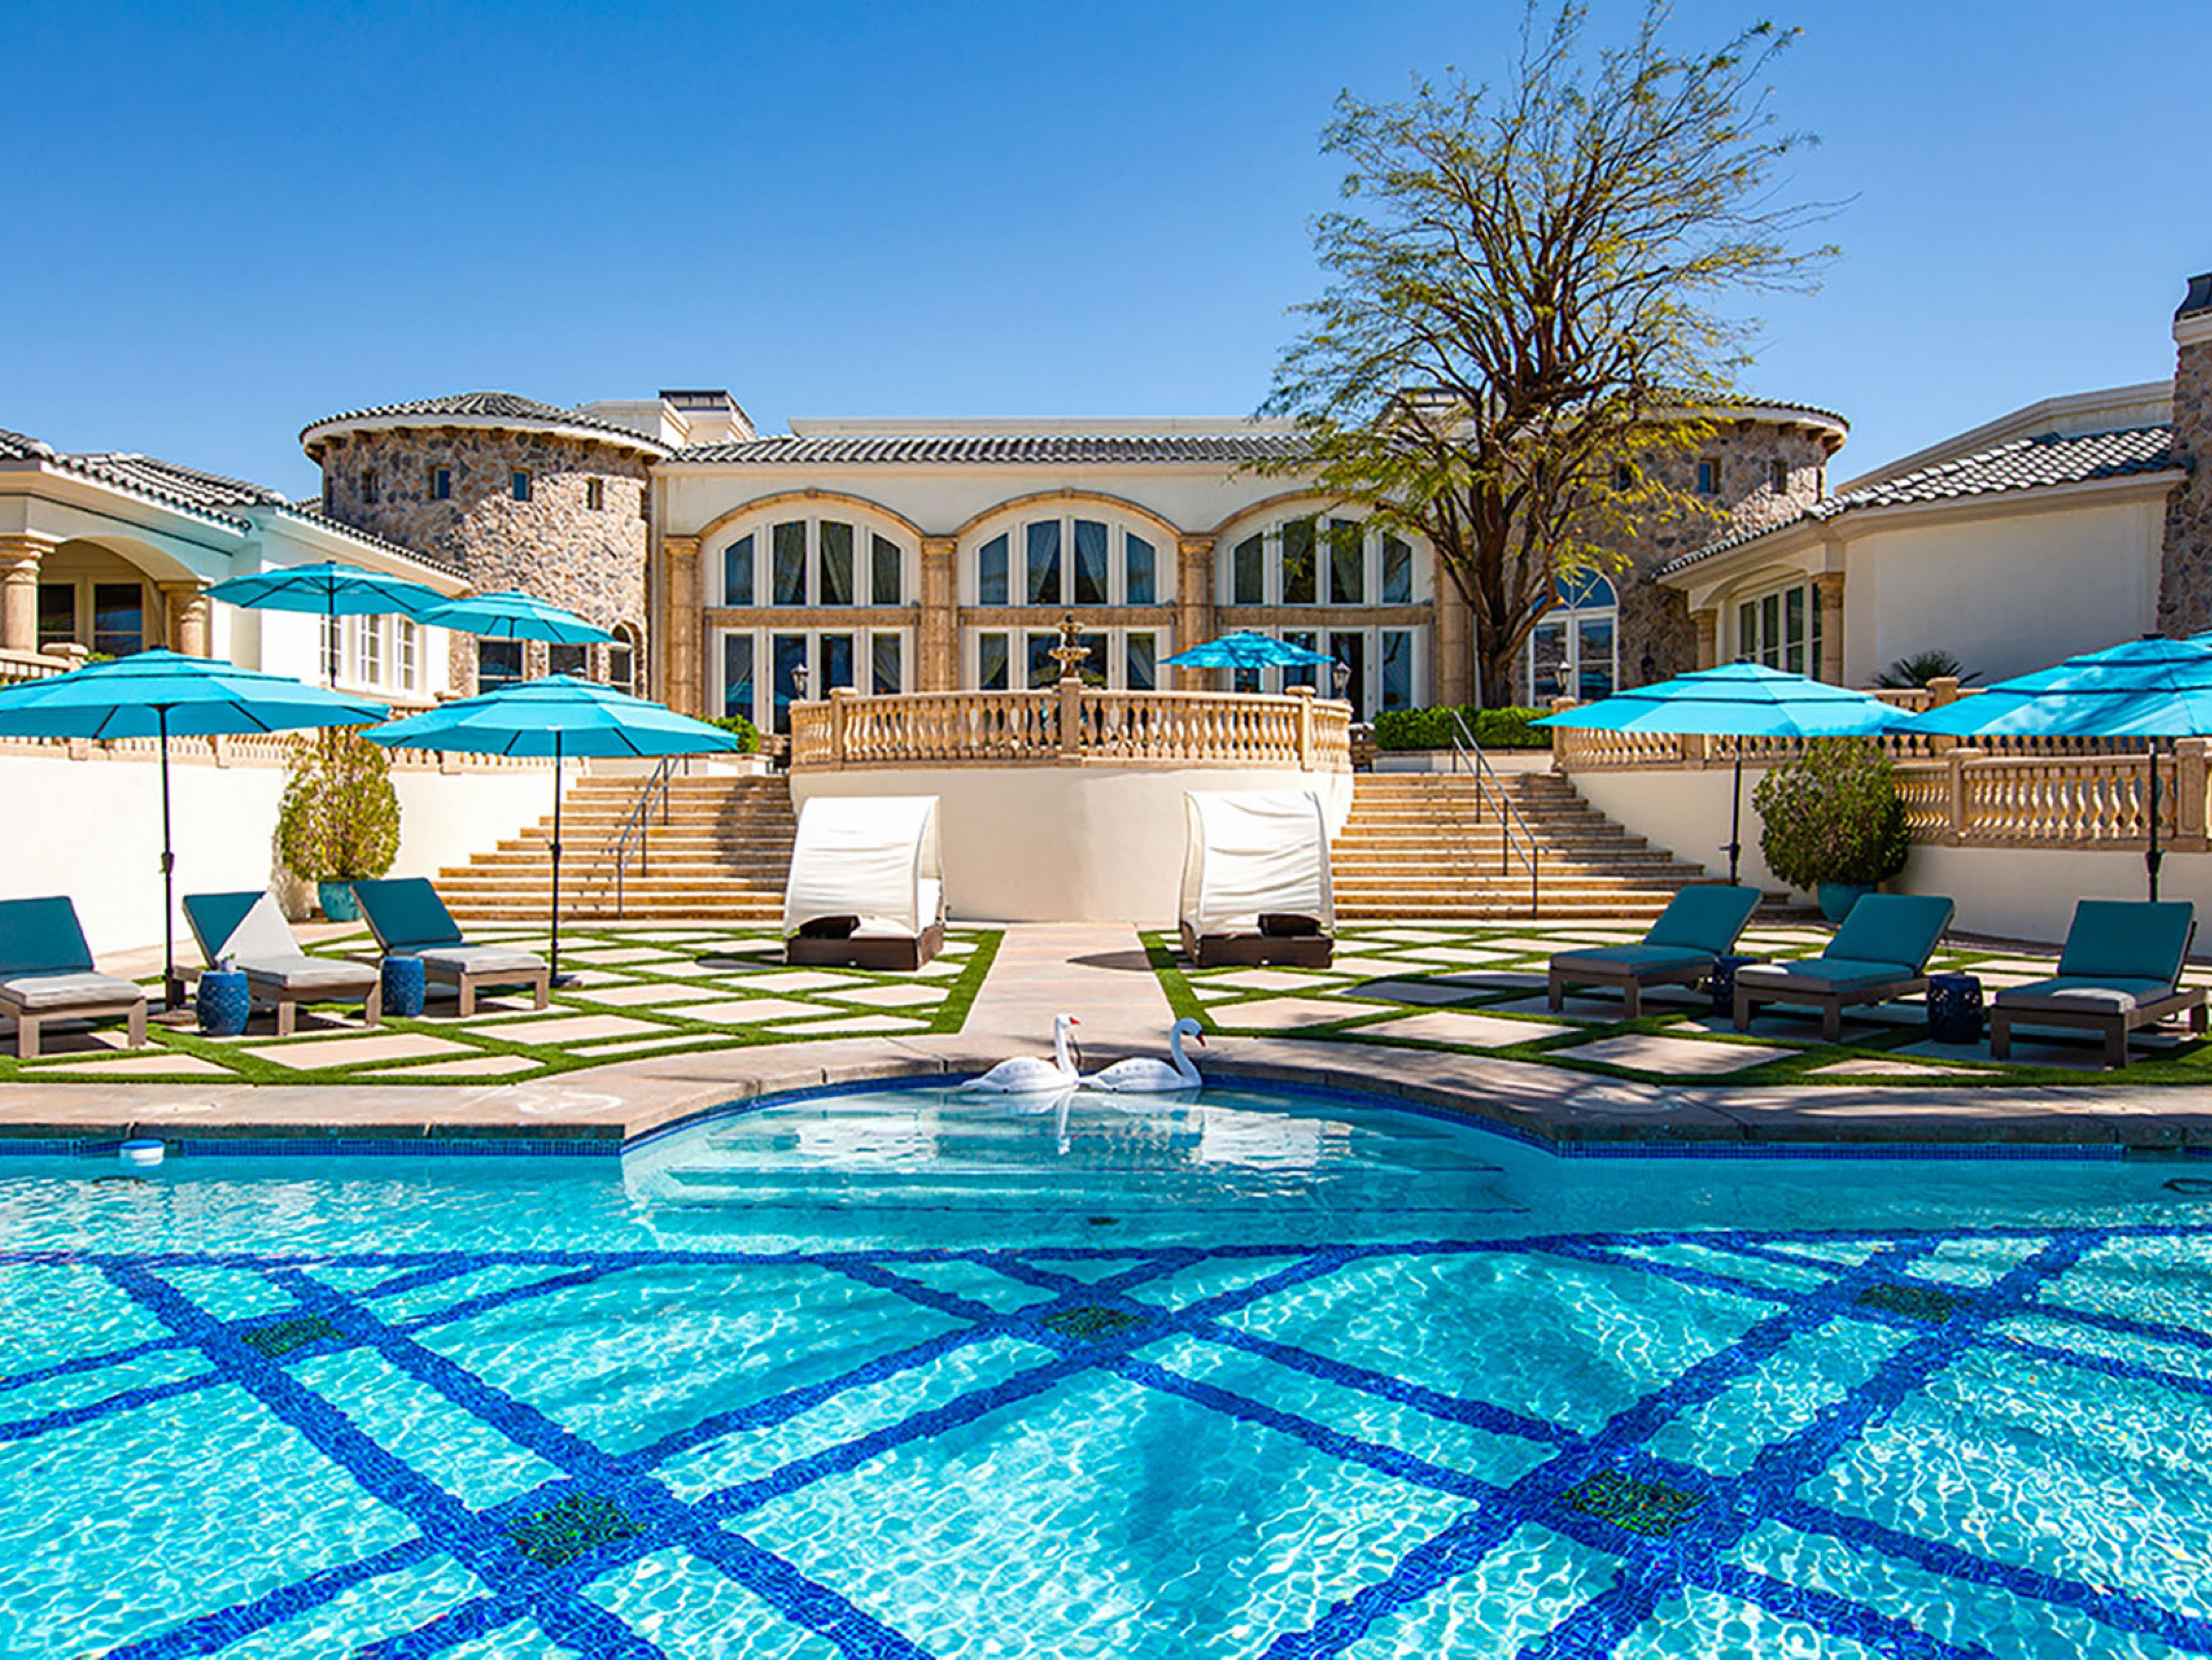 Rancho Mirage 0 luxury villas with tennis courts and pools